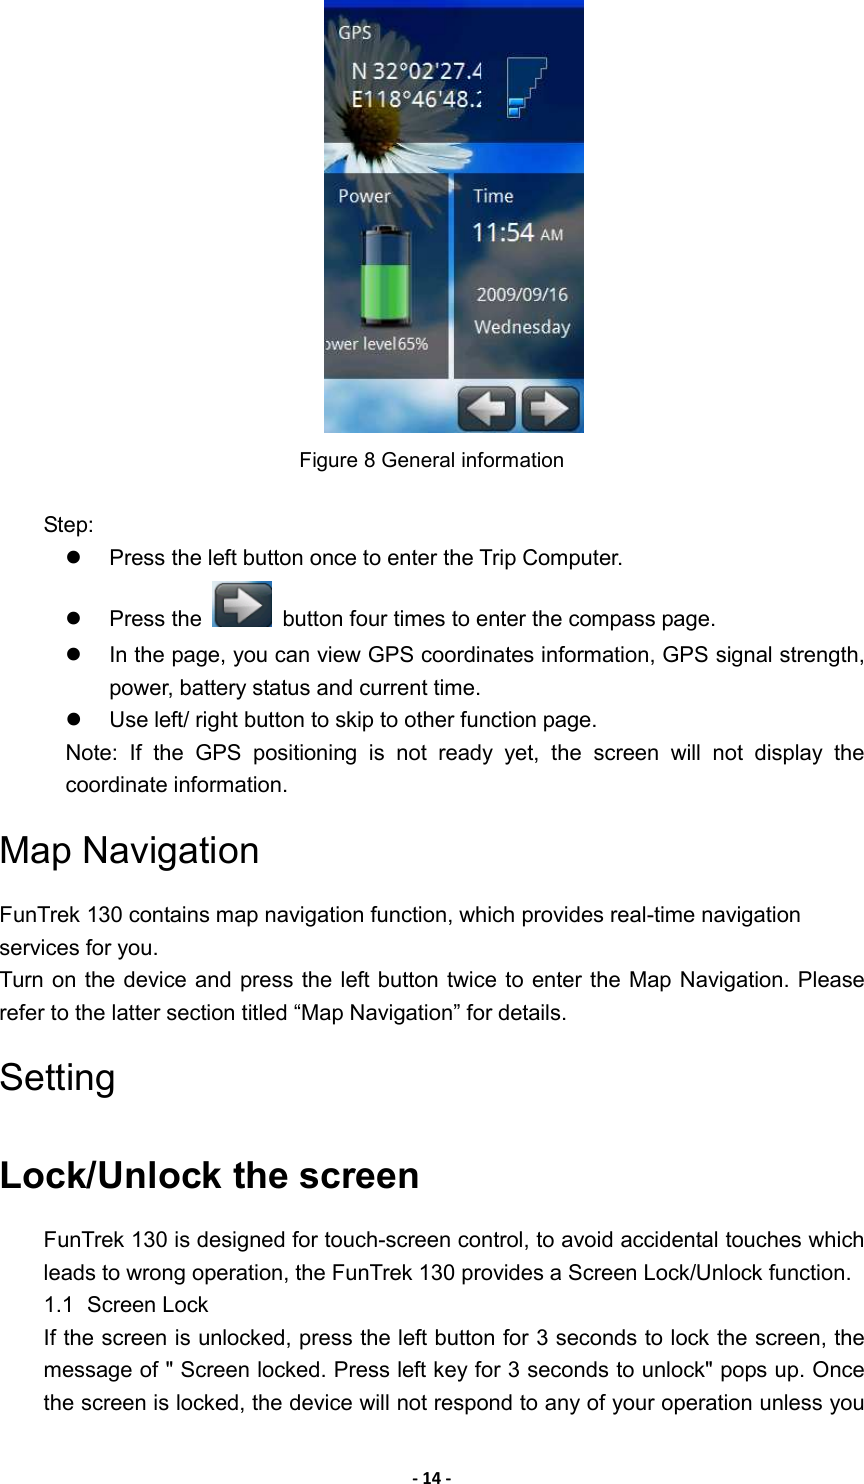 - 14 -  Figure 8 General information  Step:   Press the left button once to enter the Trip Computer.   Press the    button four times to enter the compass page.   In the page, you can view GPS coordinates information, GPS signal strength, power, battery status and current time.   Use left/ right button to skip to other function page. Note:  If  the  GPS  positioning  is  not  ready  yet,  the  screen  will  not  display  the coordinate information. Map Navigation FunTrek 130 contains map navigation function, which provides real-time navigation services for you. Turn on the device and press the left button twice to enter the Map Navigation. Please refer to the latter section titled “Map Navigation” for details. Setting Lock/Unlock the screen FunTrek 130 is designed for touch-screen control, to avoid accidental touches which leads to wrong operation, the FunTrek 130 provides a Screen Lock/Unlock function. 1.1  Screen Lock   If the screen is unlocked, press the left button for 3 seconds to lock the screen, the message of &quot; Screen locked. Press left key for 3 seconds to unlock&quot; pops up. Once the screen is locked, the device will not respond to any of your operation unless you 